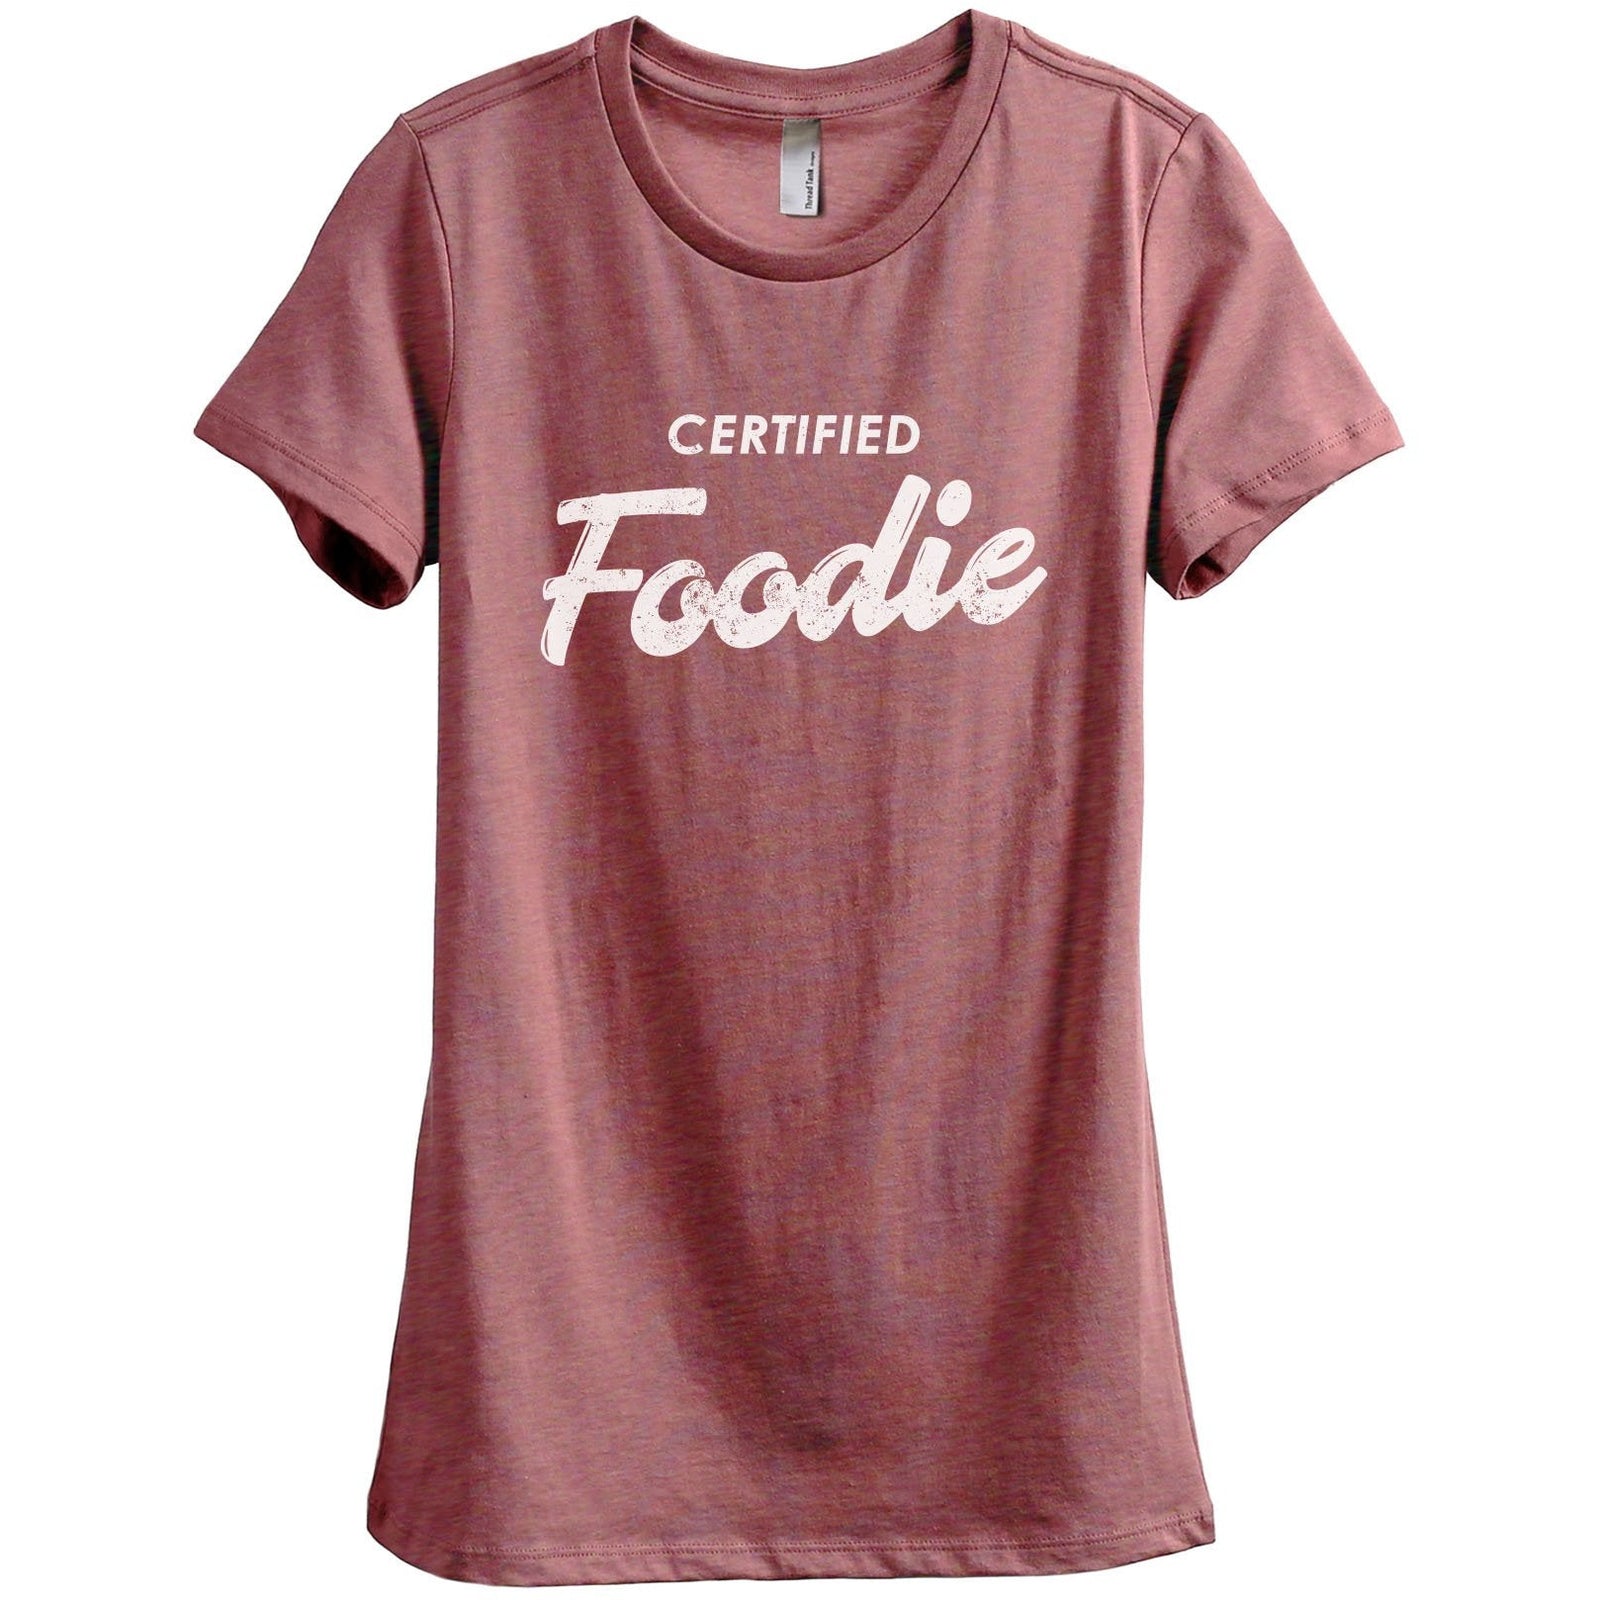 Certified Foodie - Thread Tank | Stories You Can Wear | T-Shirts, Tank Tops and Sweatshirts